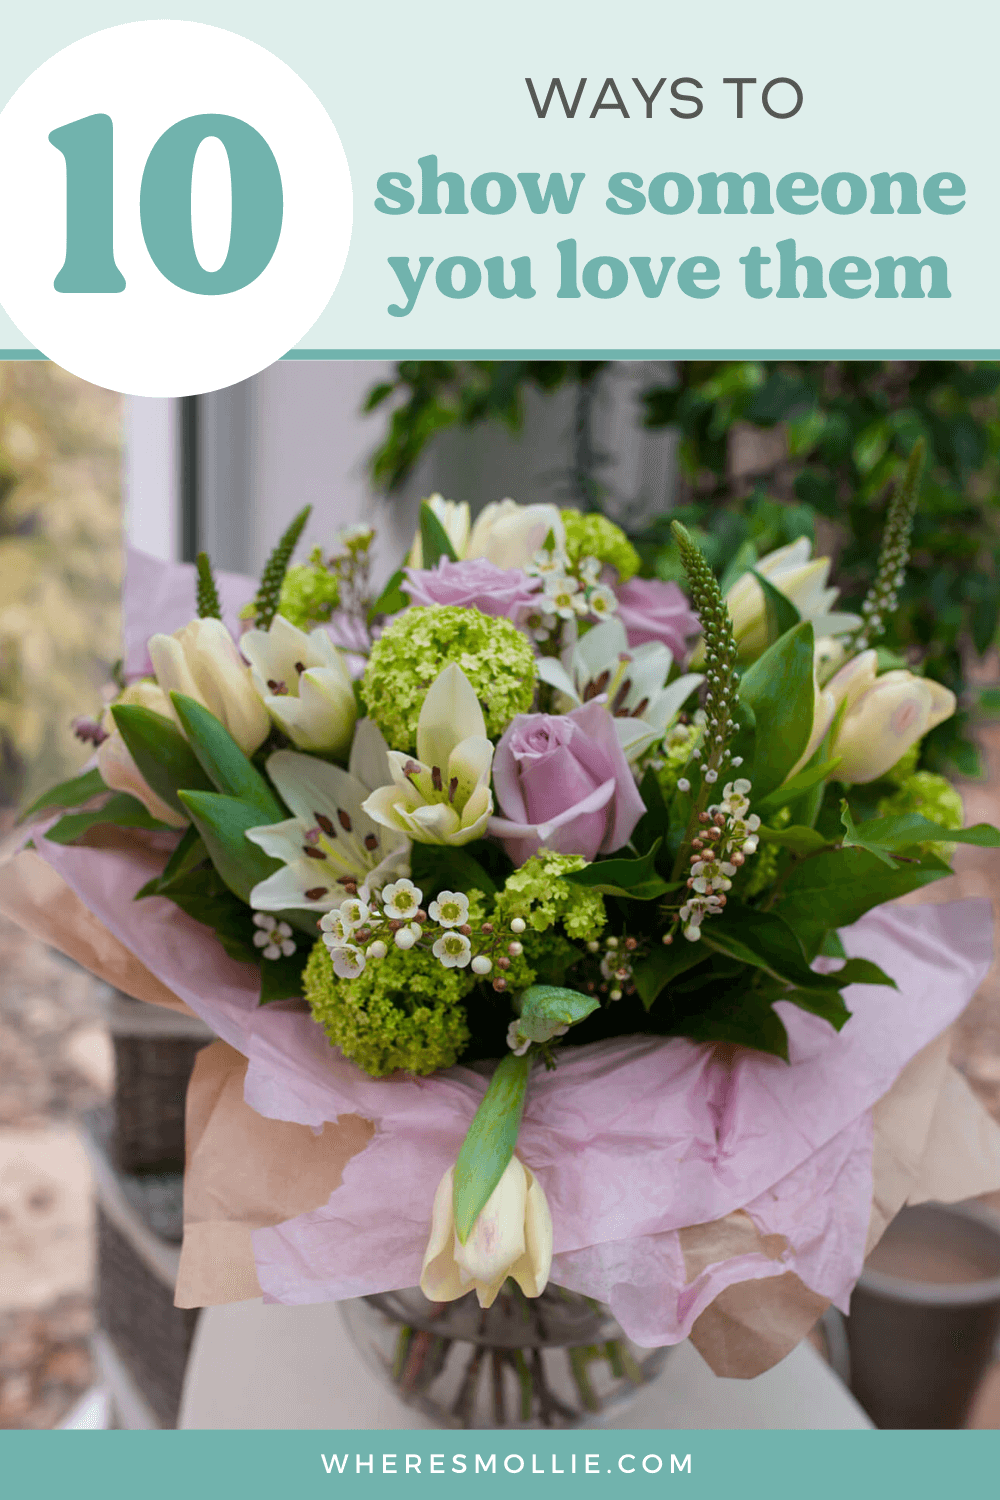 10 ways to show someone that you love them - gift ideas for a loved one